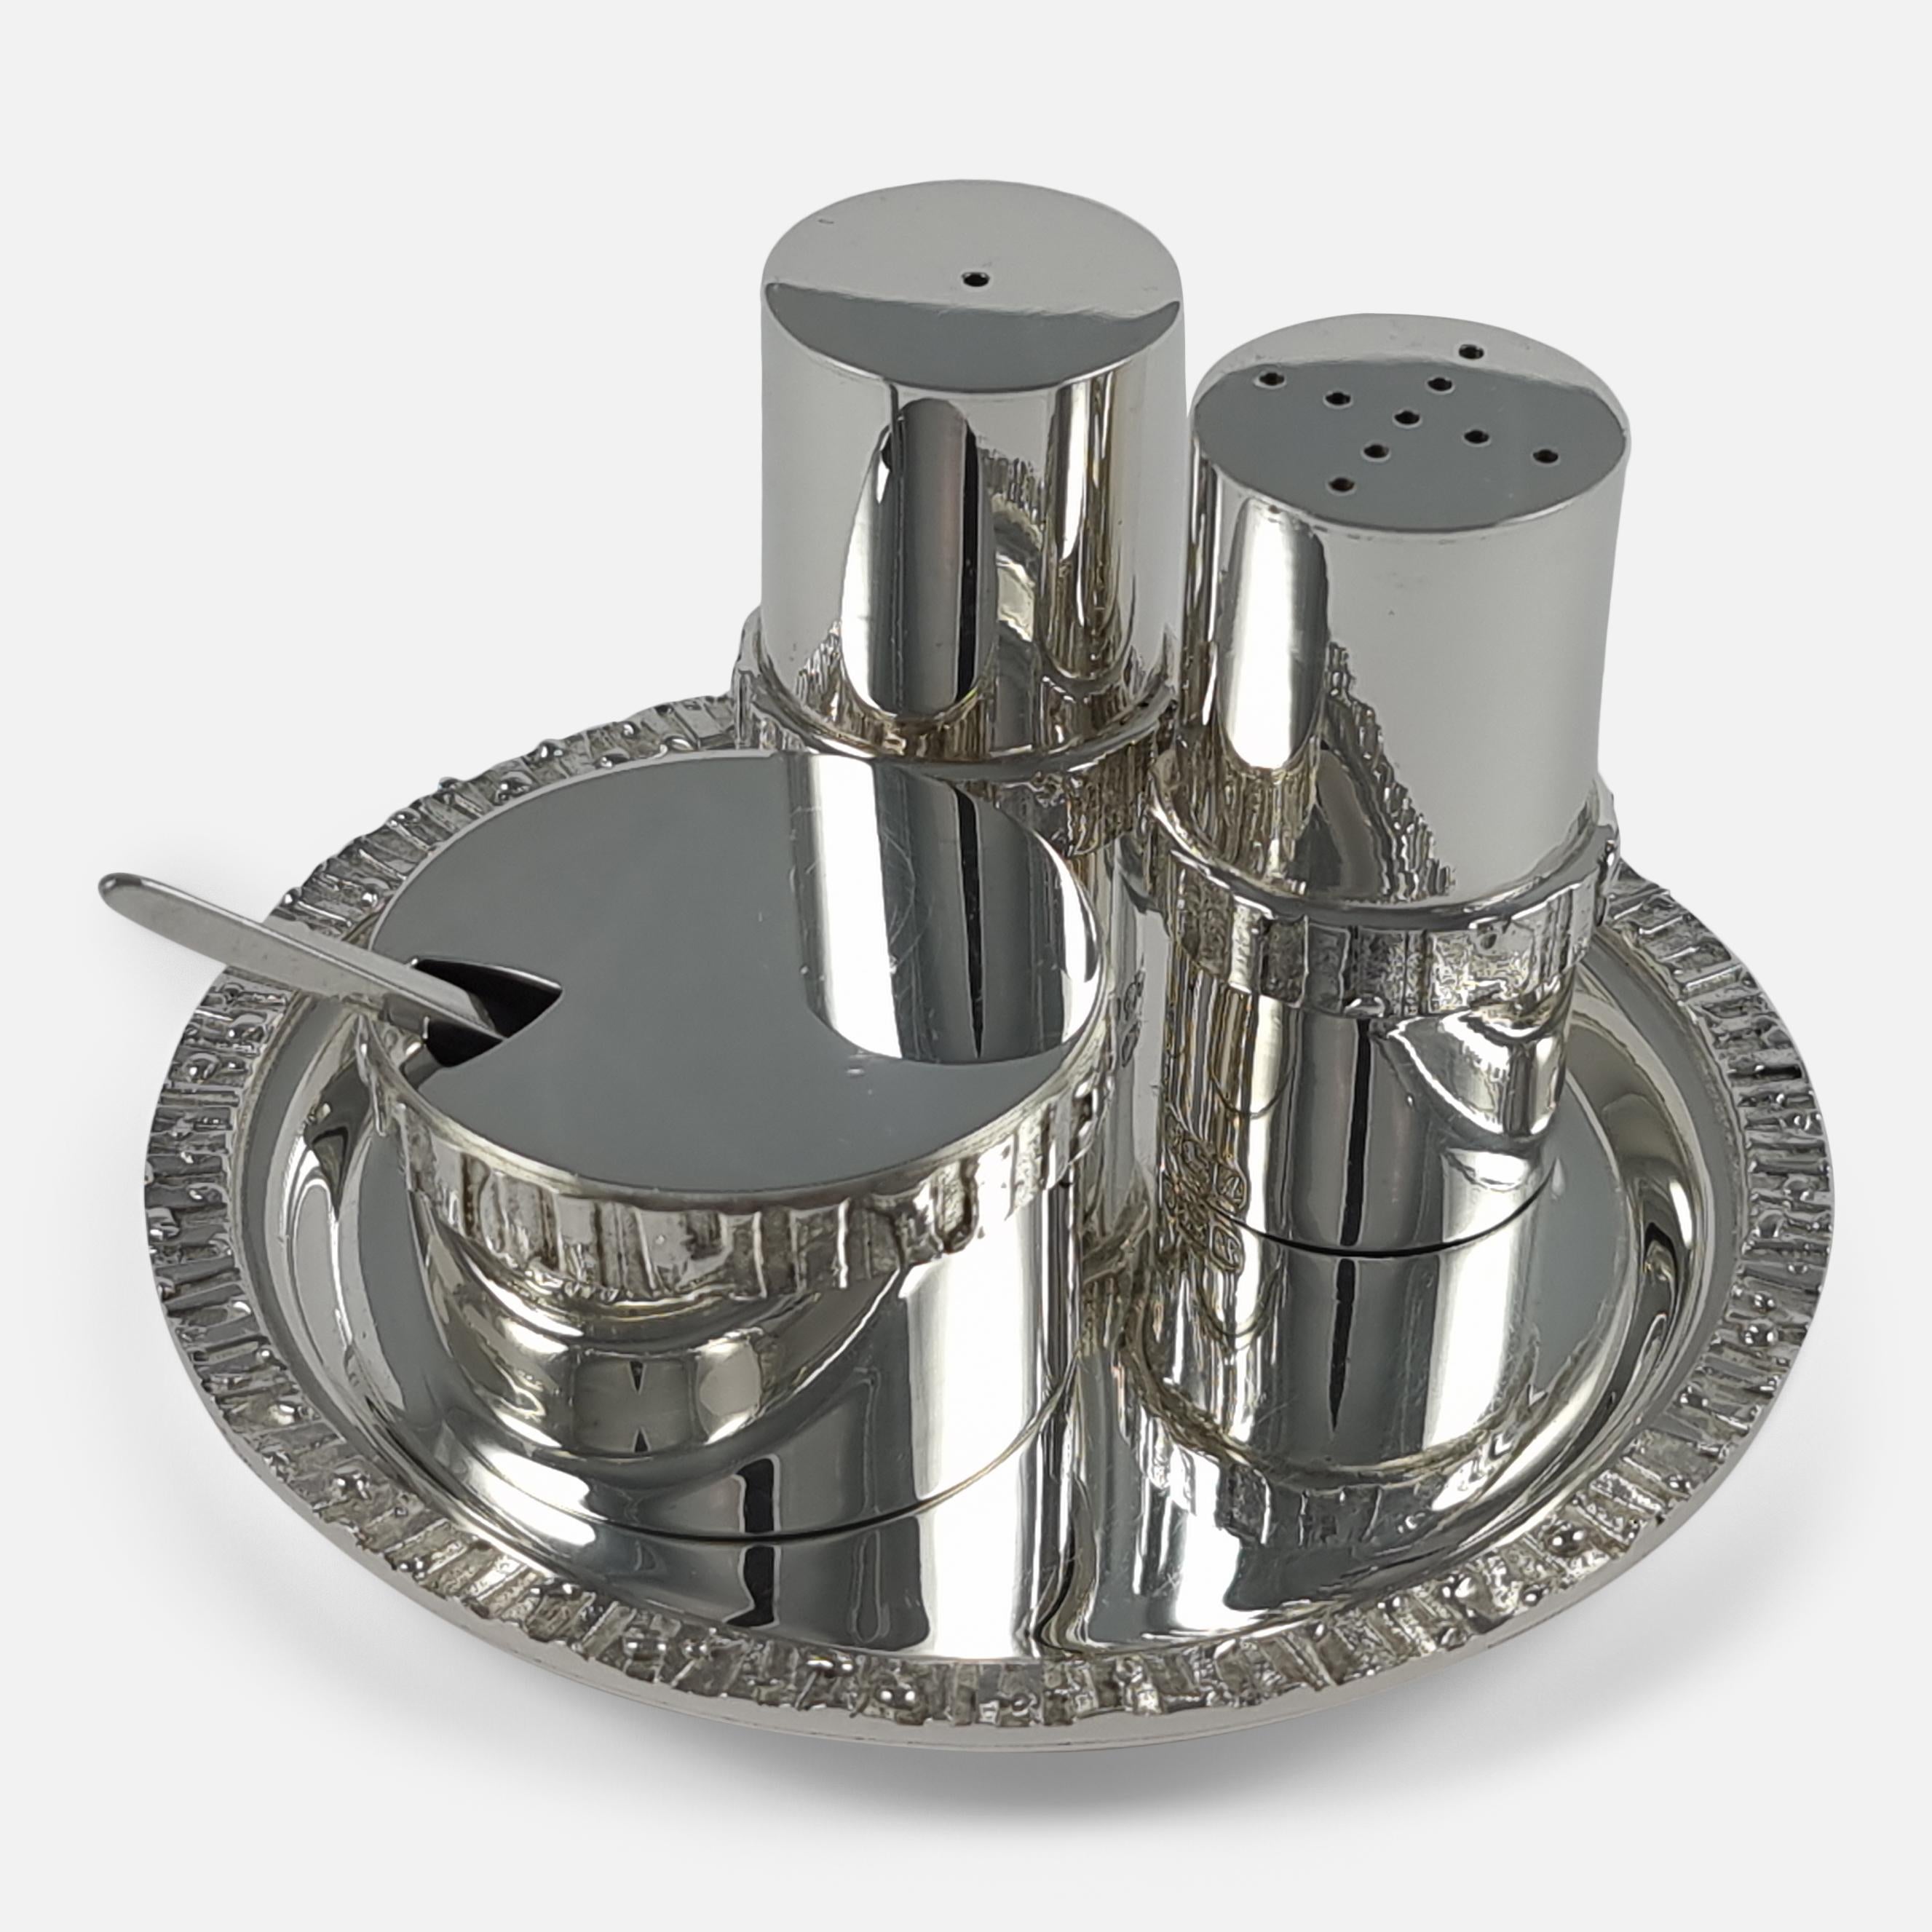 Modern Sterling Silver Condiment Set and Tray, Brian Asquith